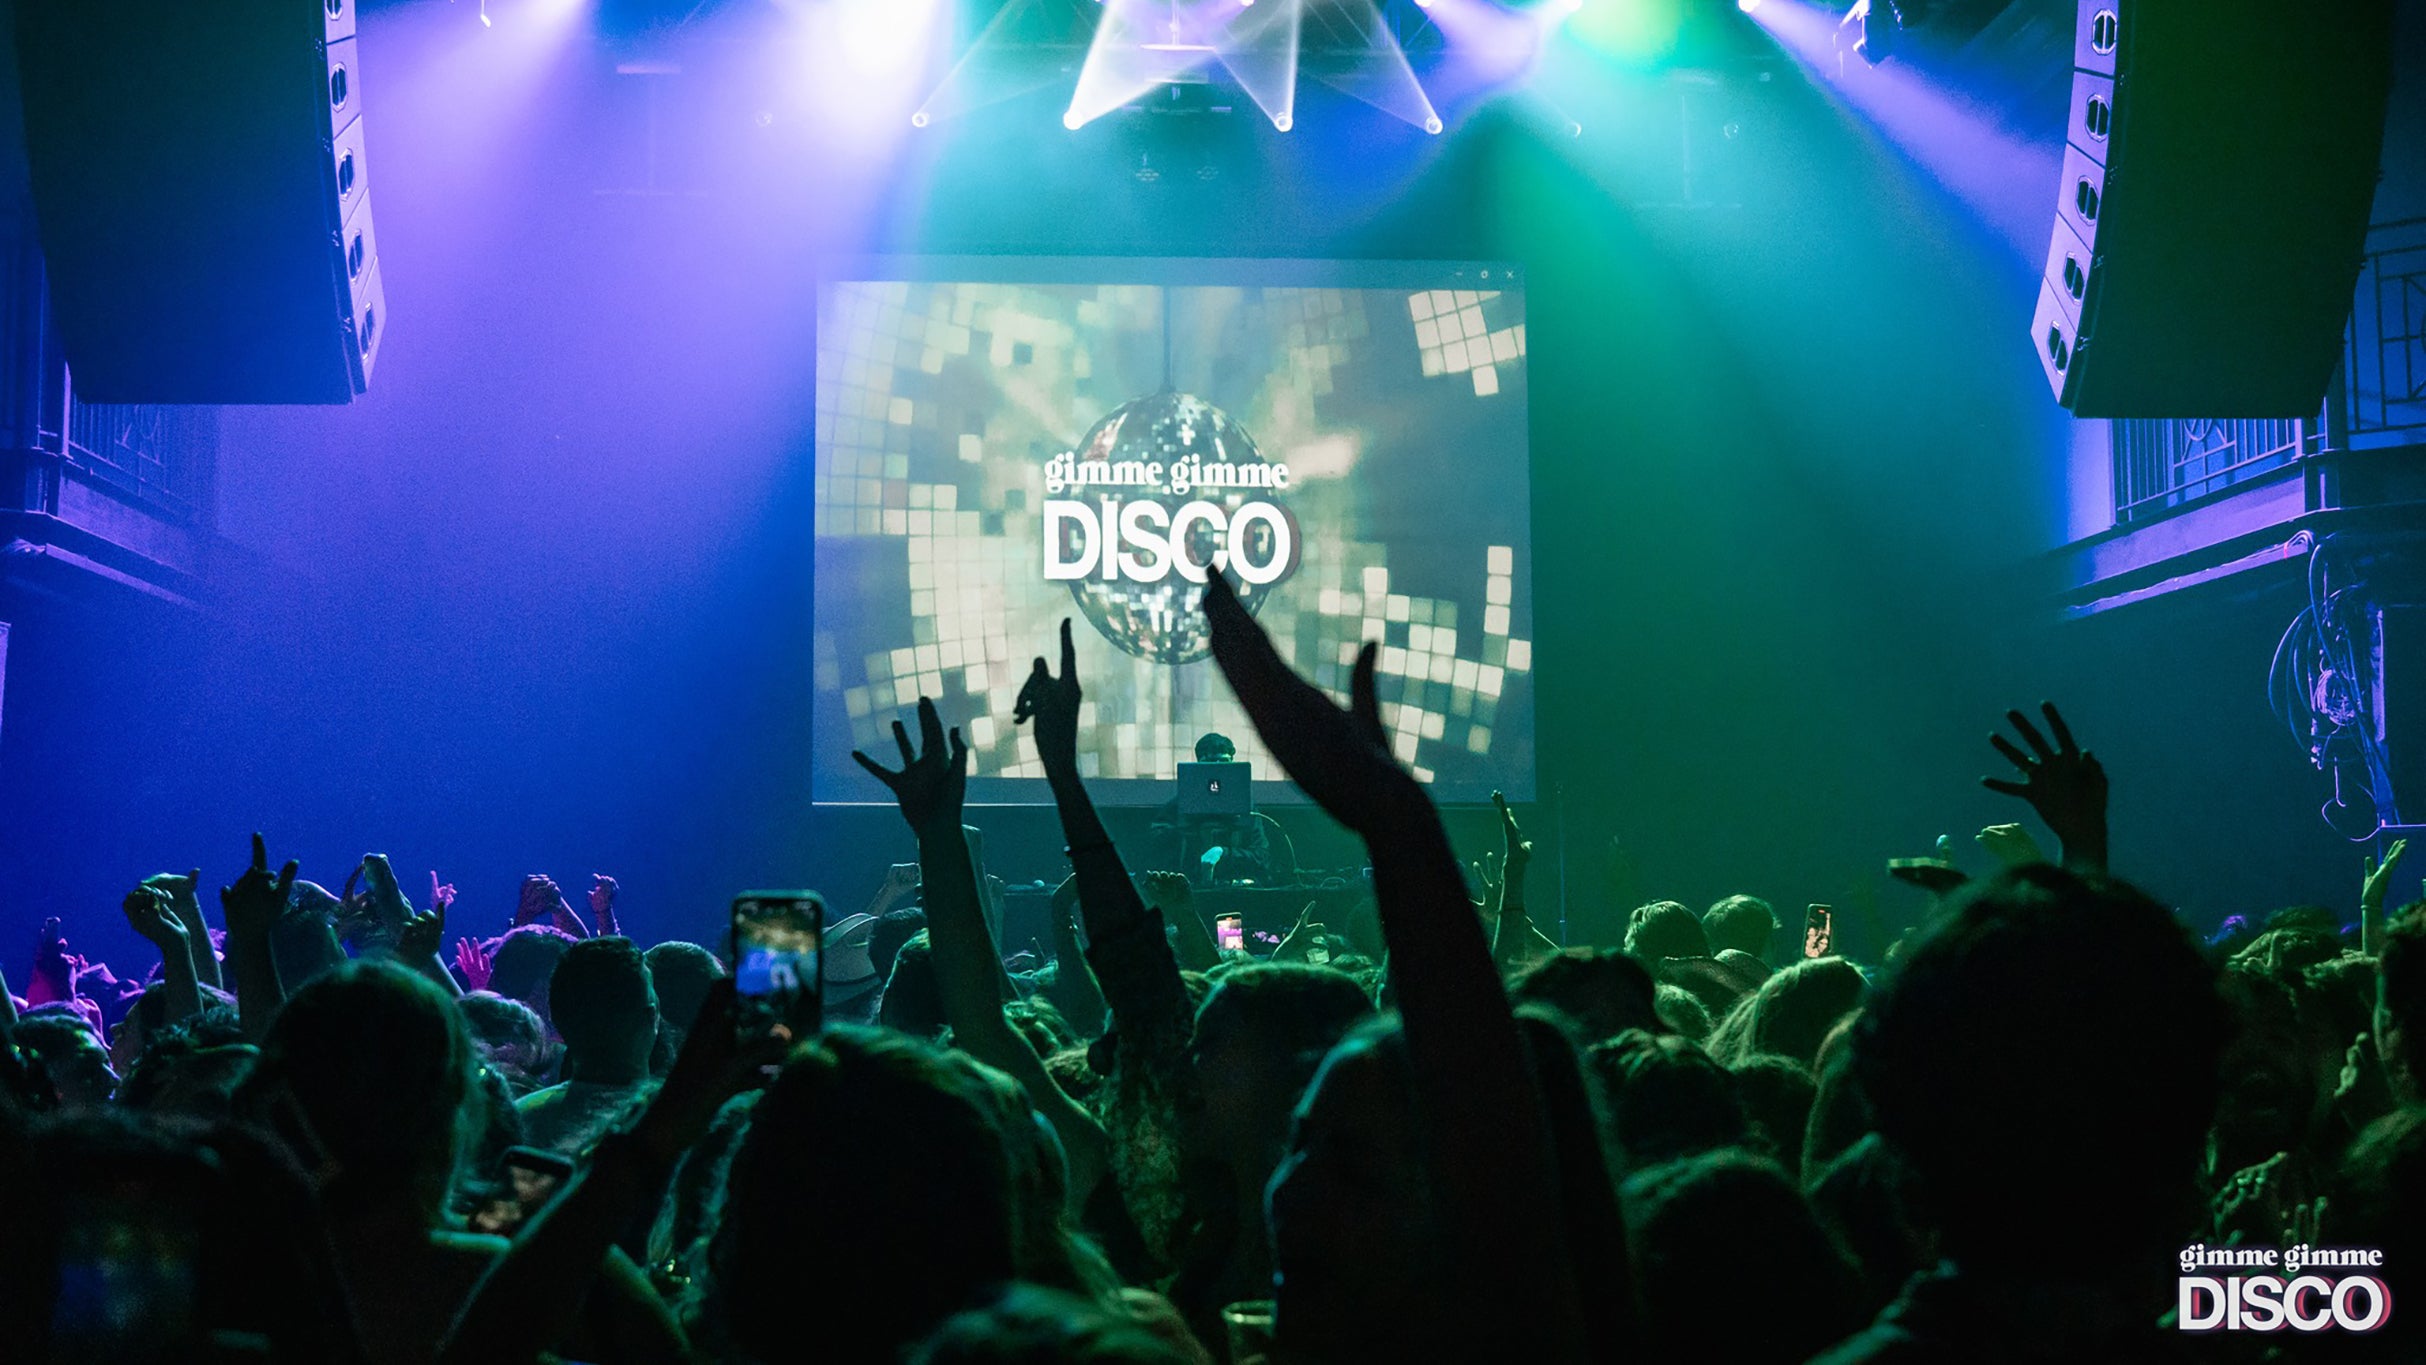 Gimme Gimme Disco - 21+ Event presale code for legit tickets in Asbury Park